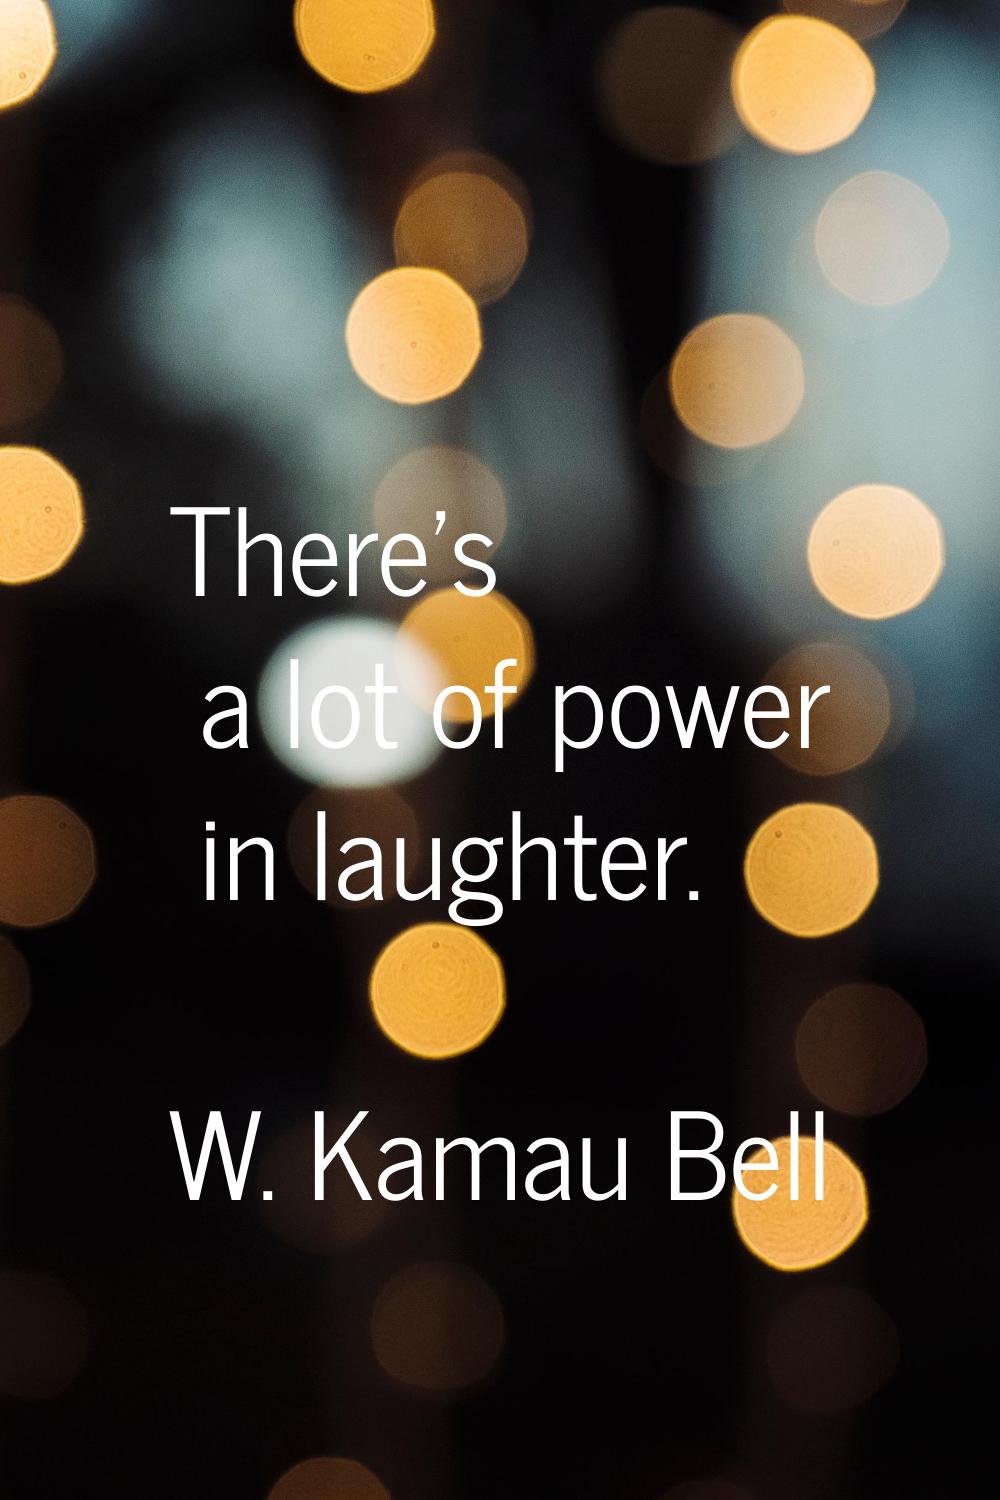 There's a lot of power in laughter.